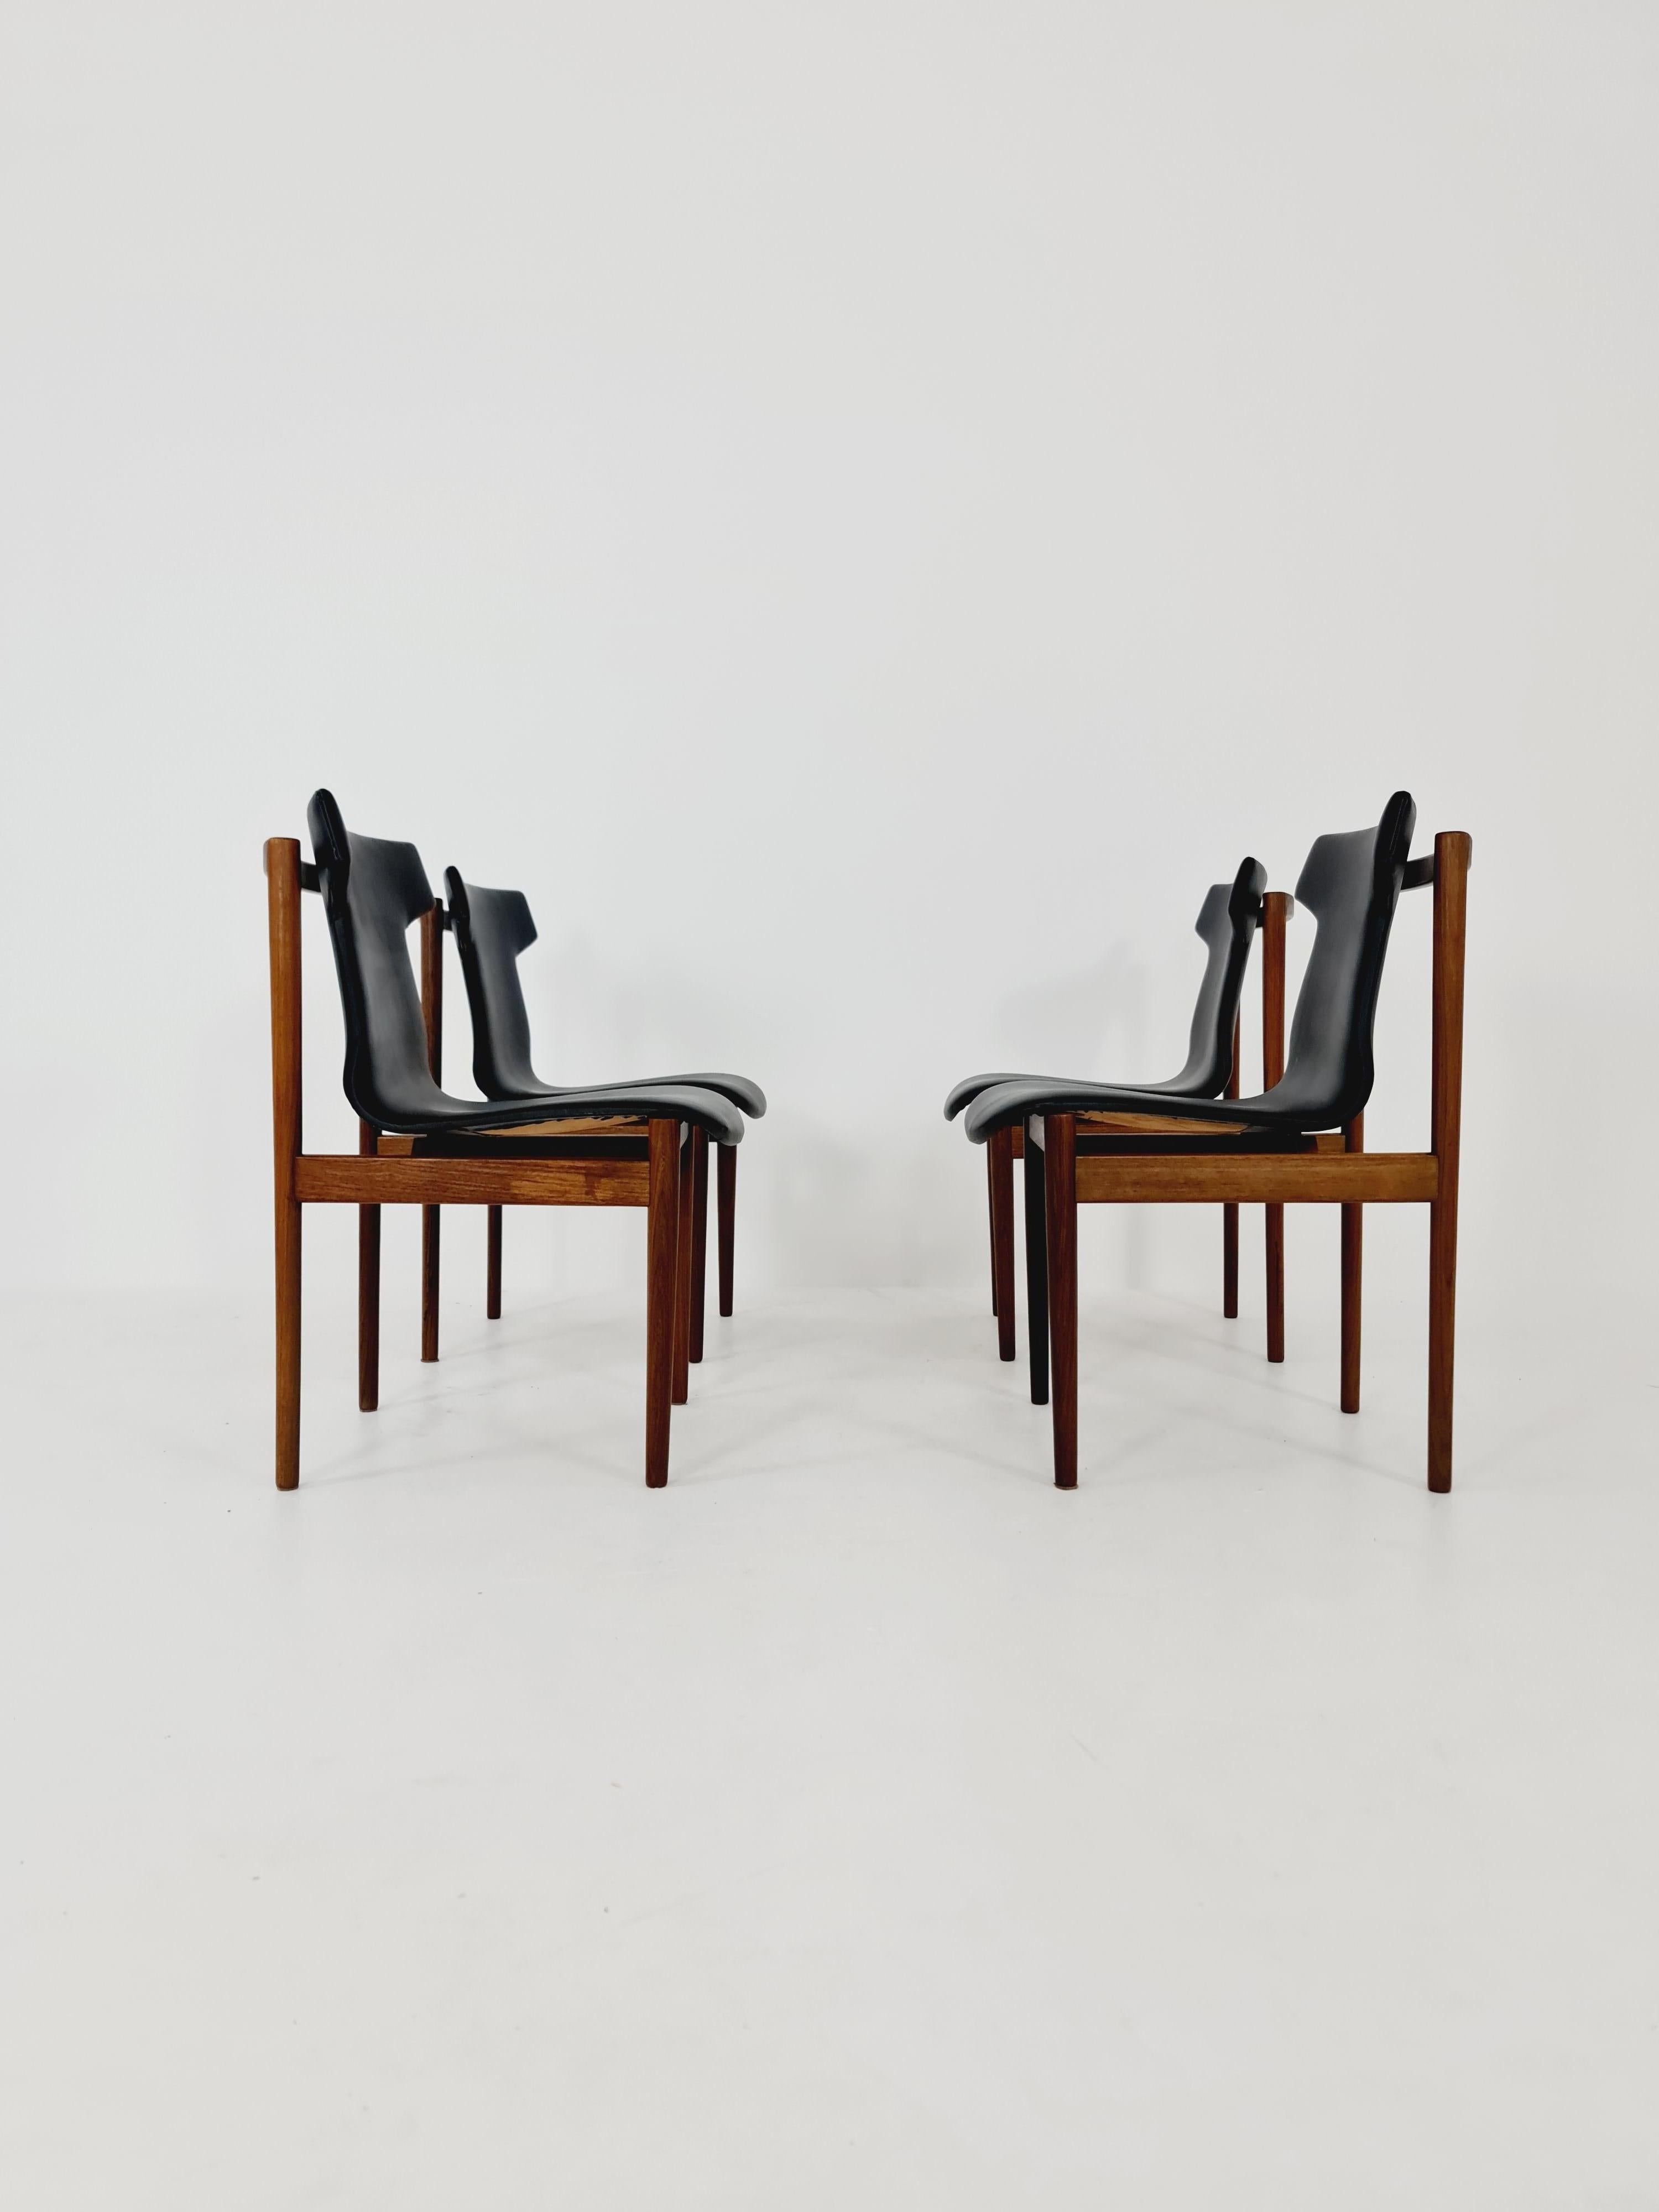 4 Vintage solid Rosewood chairs By Inger Klingenberg for Fristho Holland In Good Condition For Sale In Gaggenau, DE